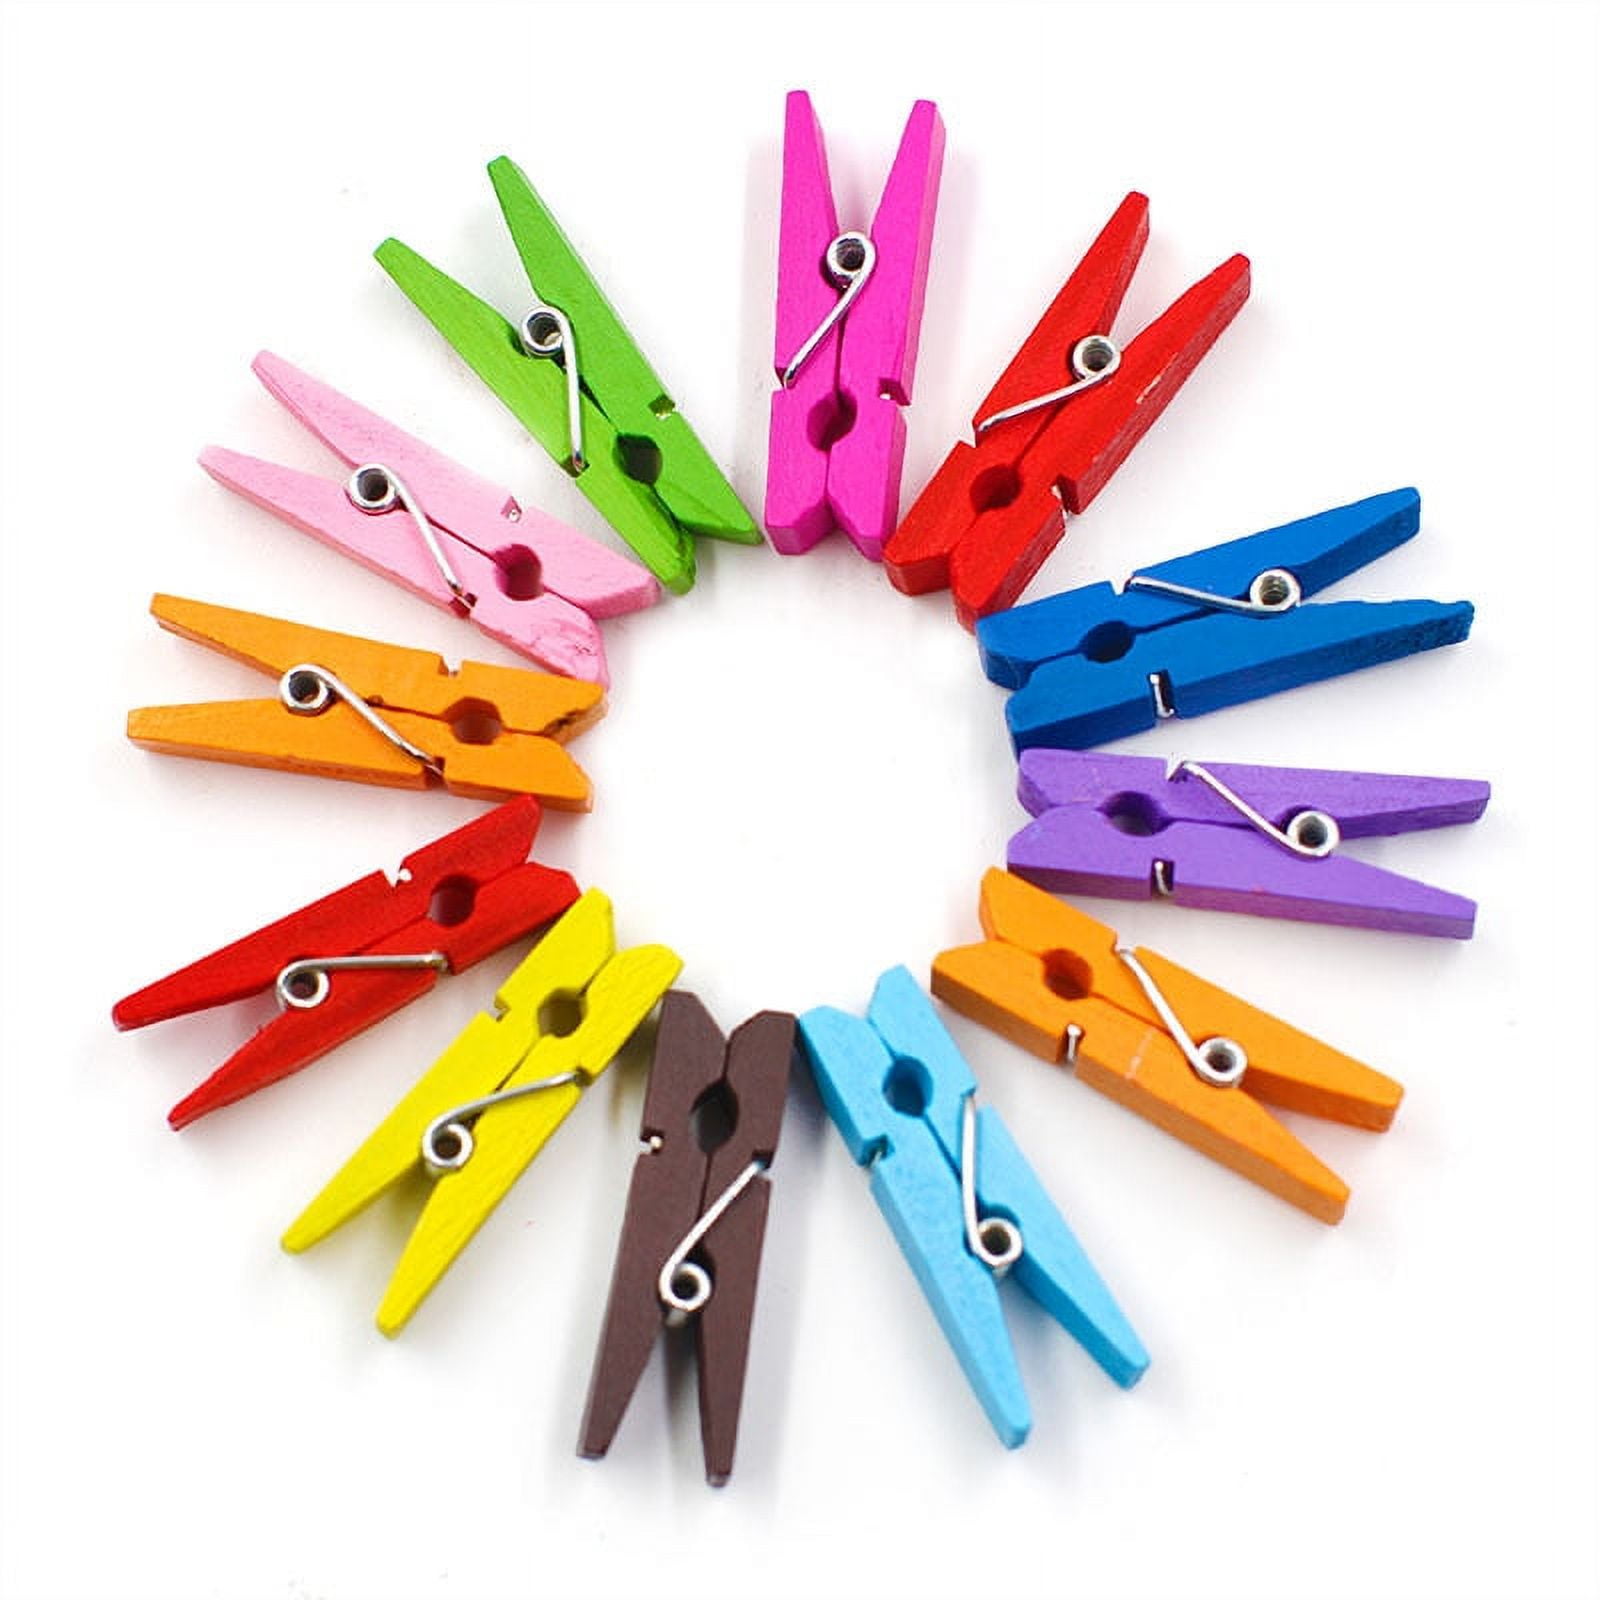 Namotu 20 Pcs Colorful Clothespins Clothes Pins Wooden - Small Mini Clothespins for Photos Pictures Crafts Color Close Pin Wood Clothing Chip Clip Decorative